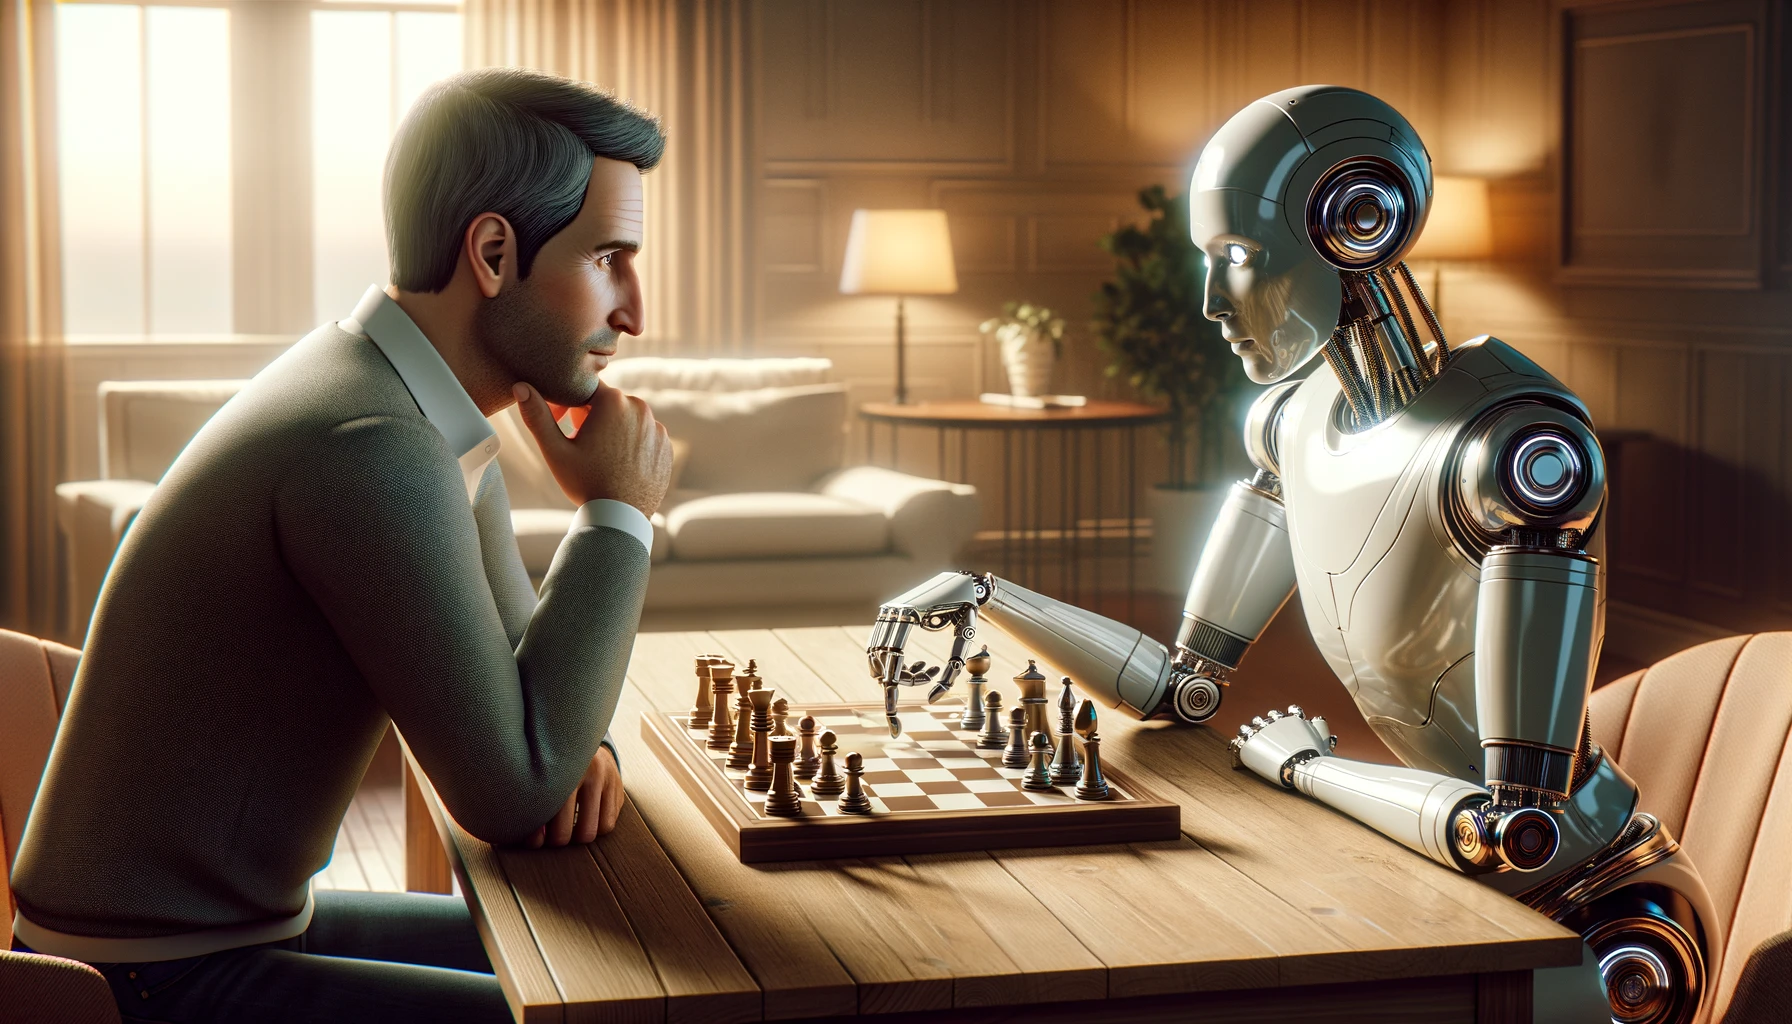 A human playing chess against a robot